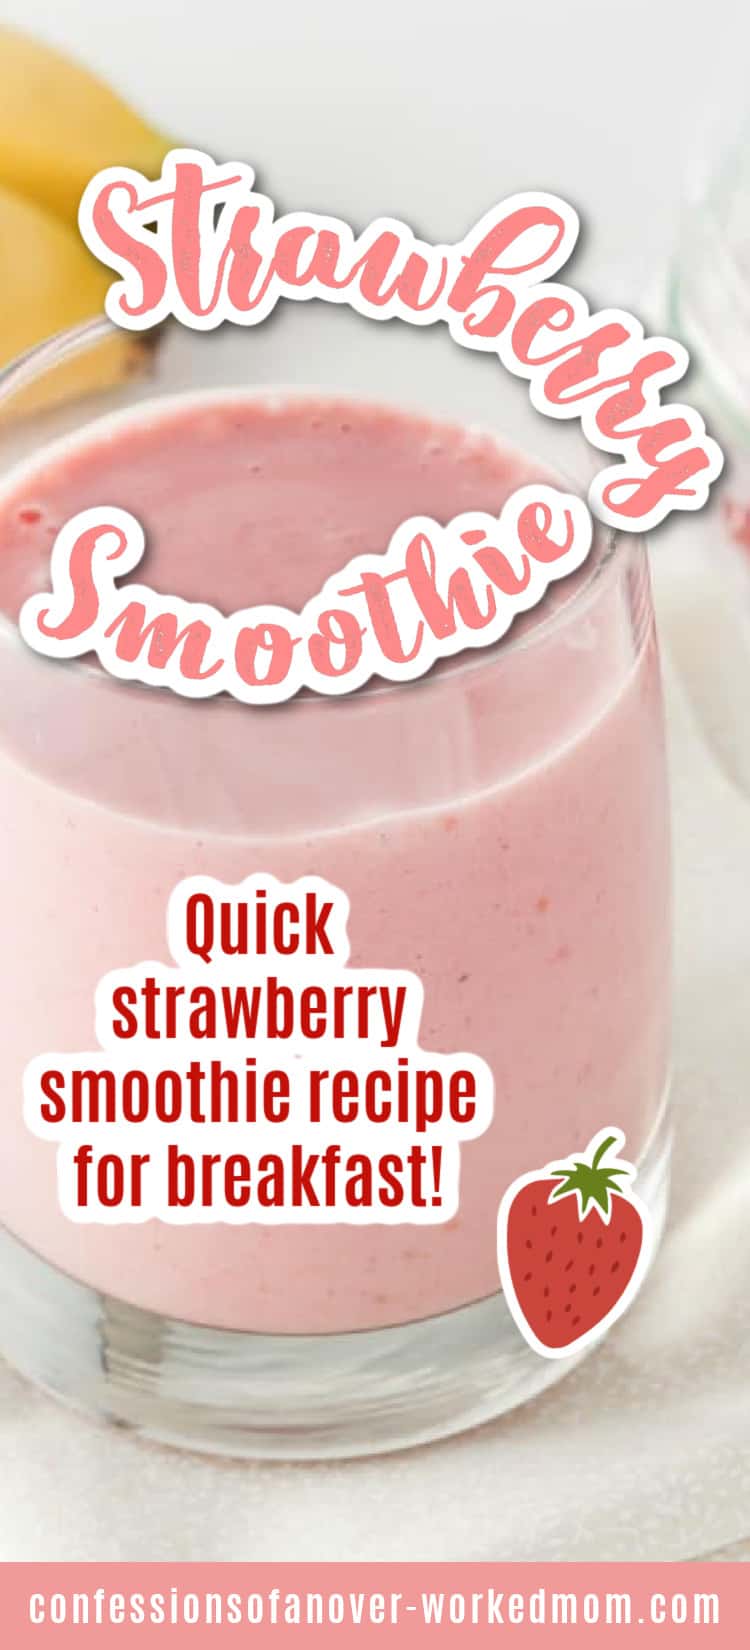 Looking for Hamilton Beach single-serve blender recipes? Check this quick and easy single serve strawberry smoothie recipes for breakfast.